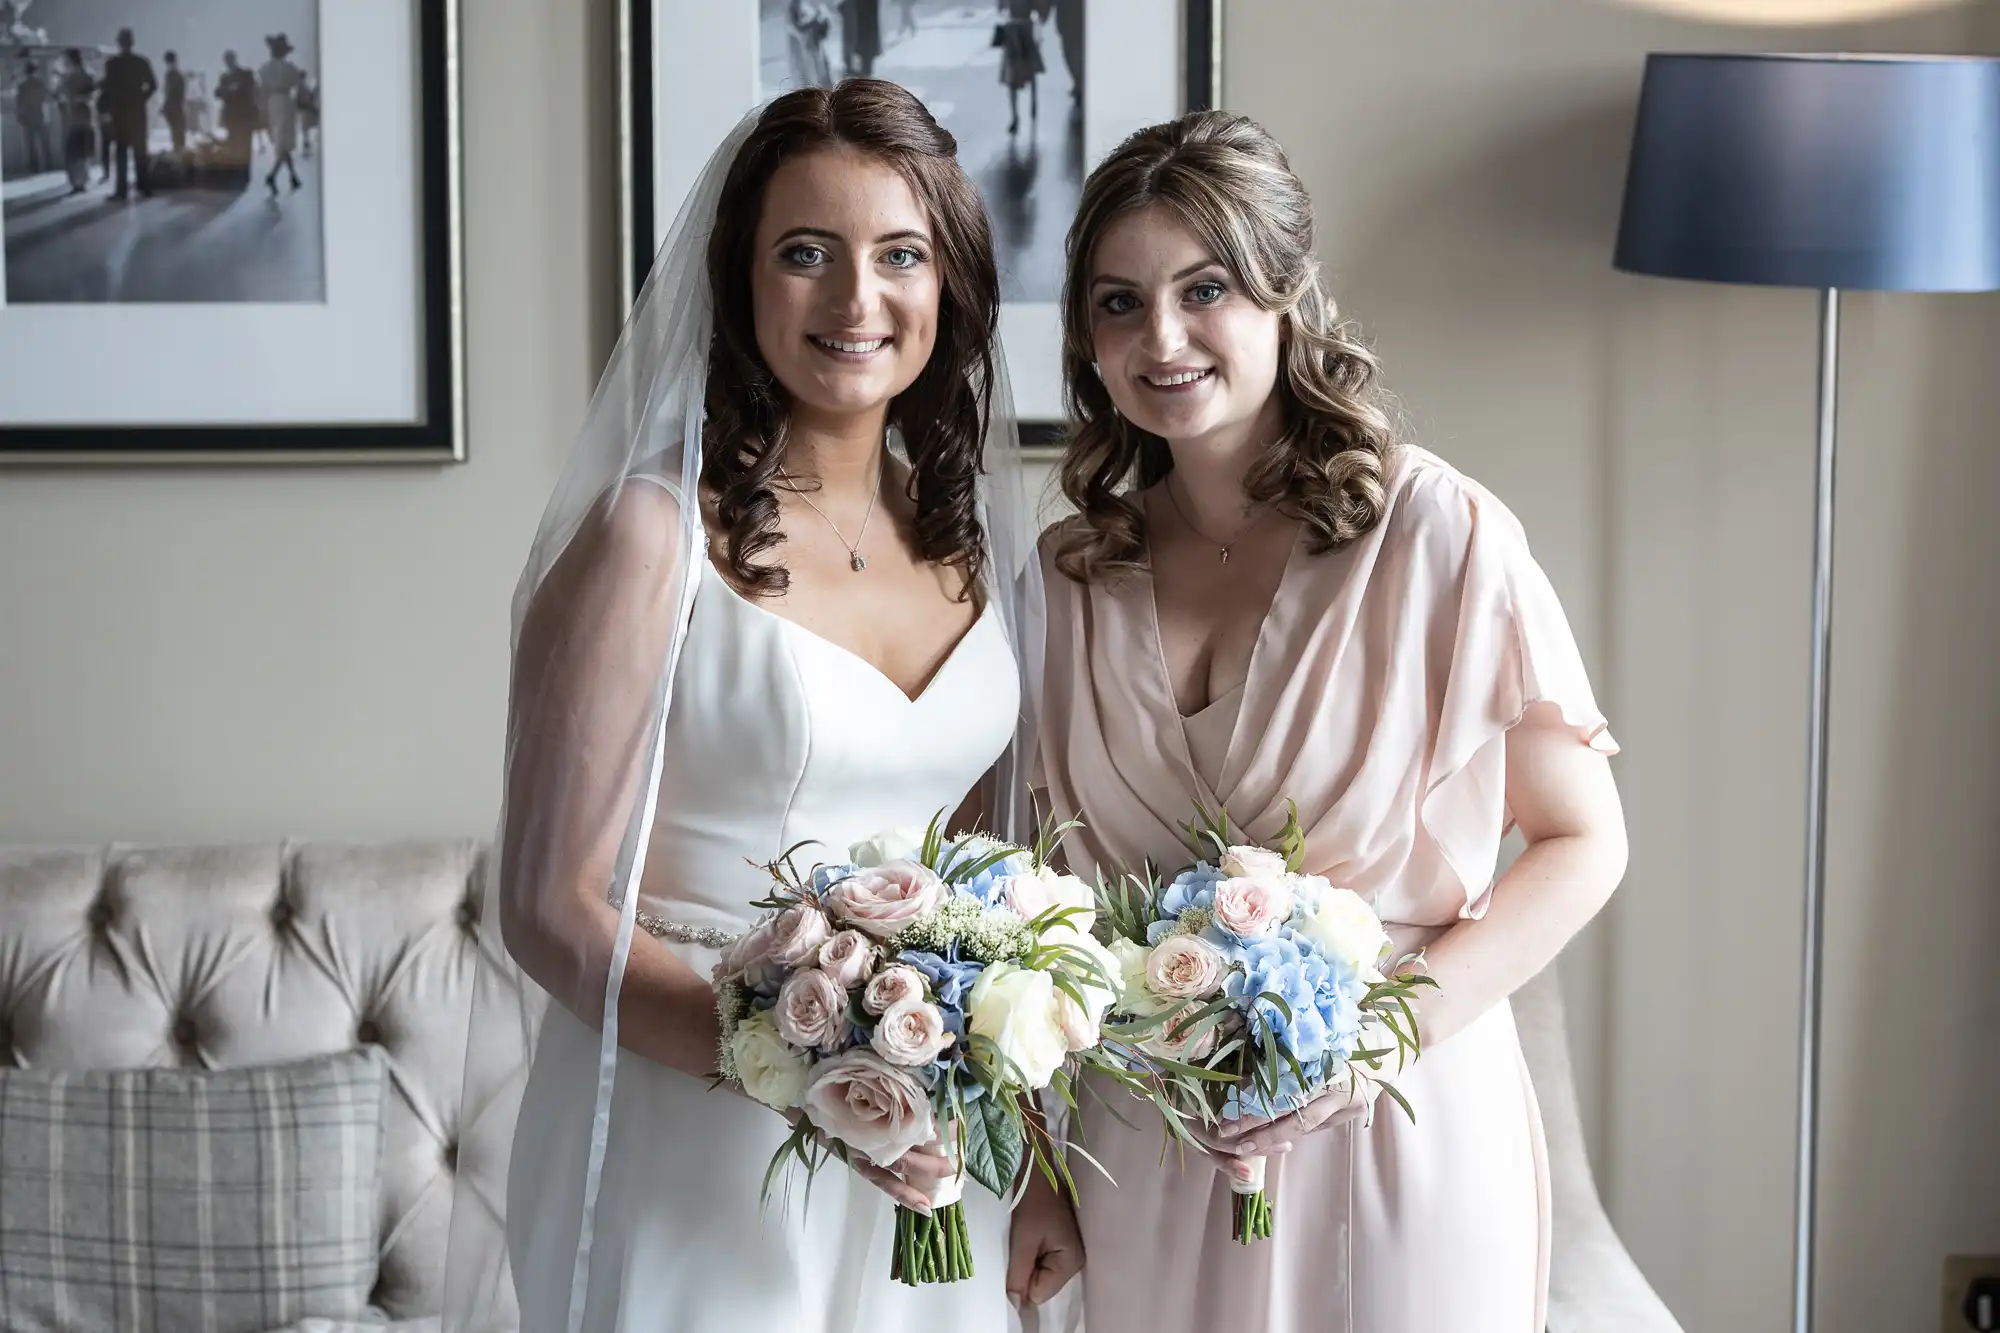 Two women in formal attire, one in a white dress and the other in a pink shawl, holding bouquets and smiling, standing in a room with elegant decor.